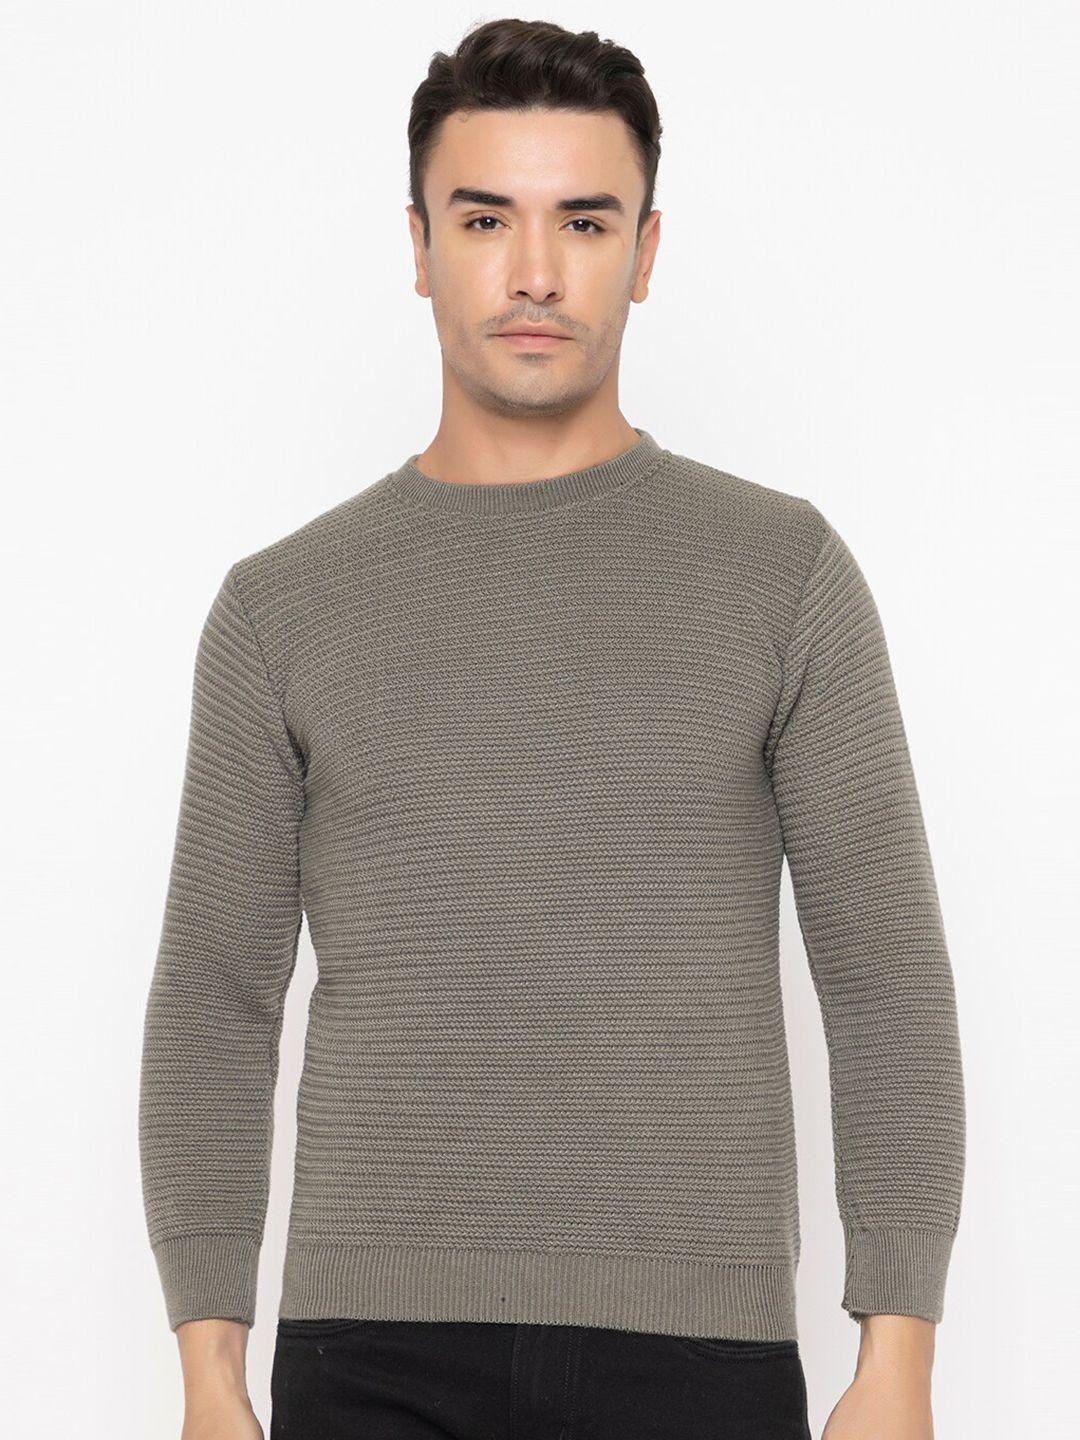 tysort self design cable knit wool pullover